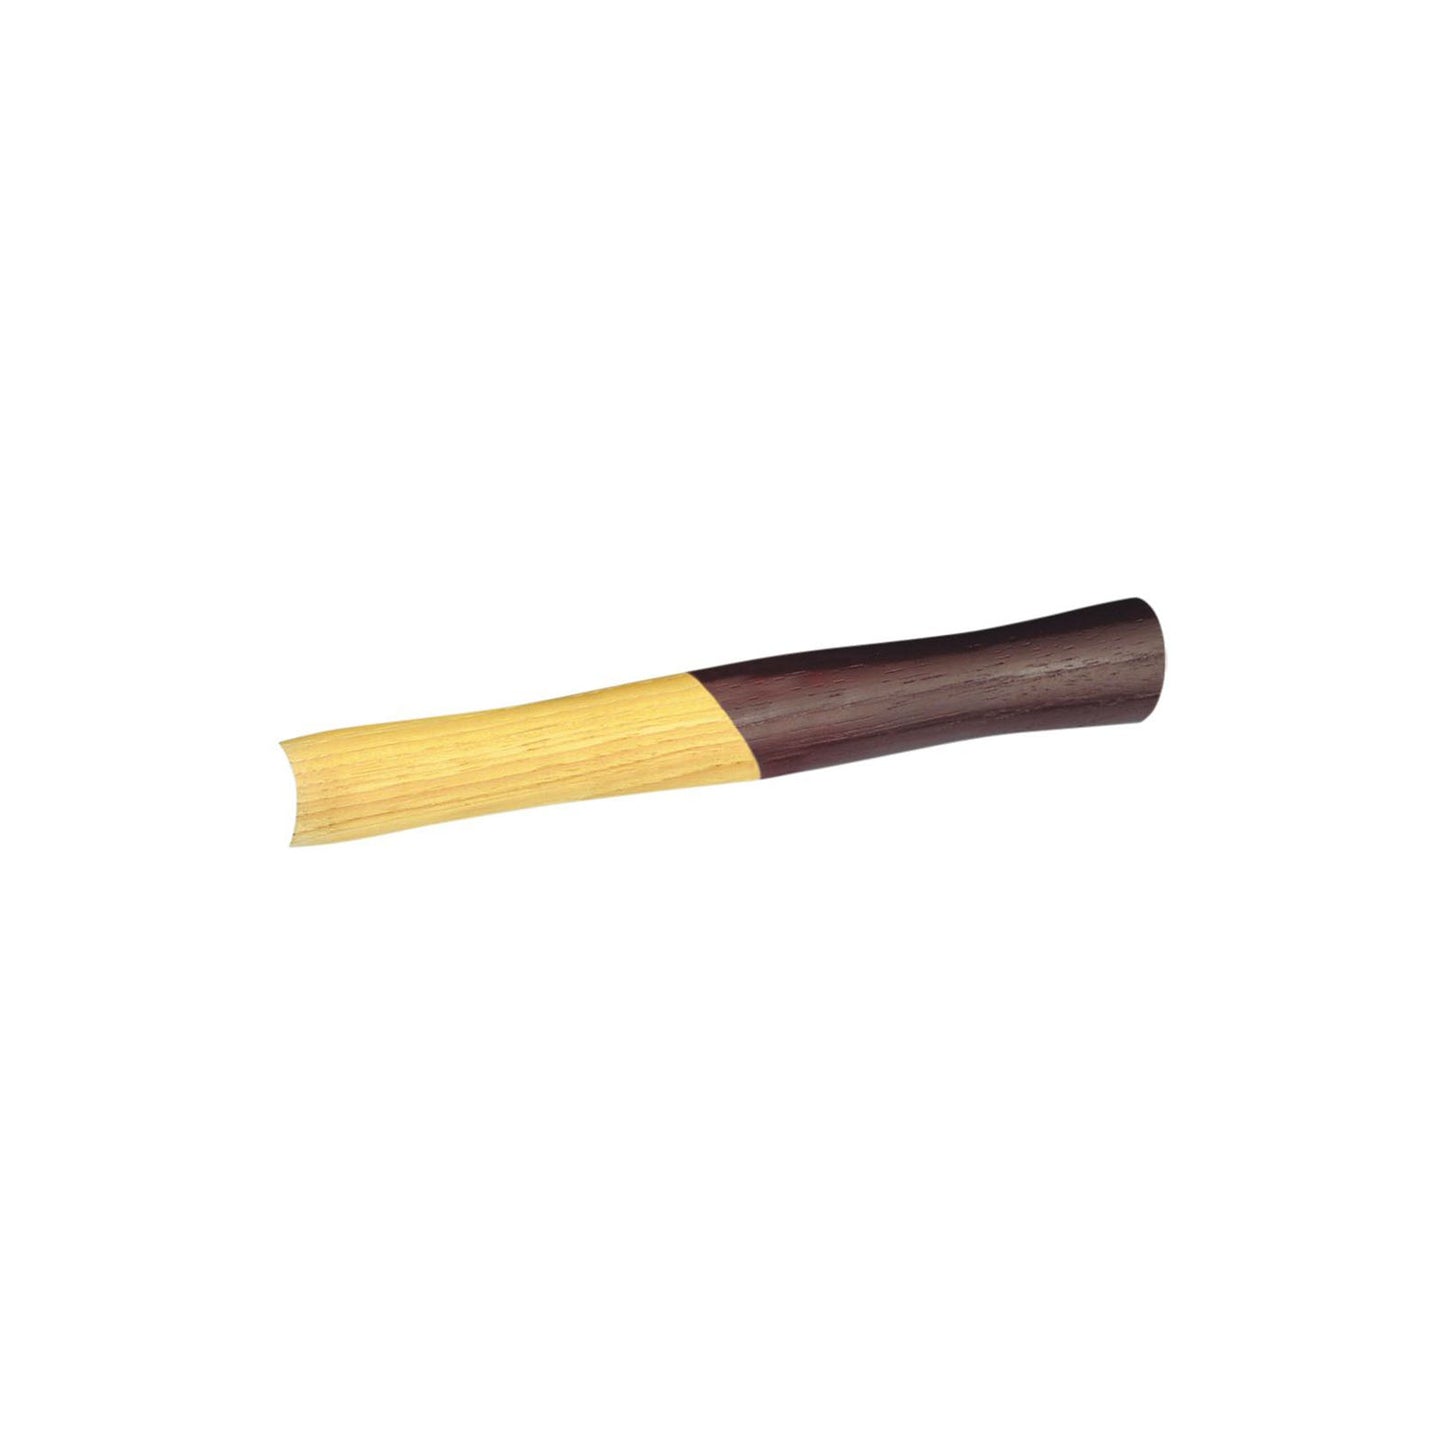 GEDORE E 248 H-50 - Walnut replacement handle 32cm (8739930)